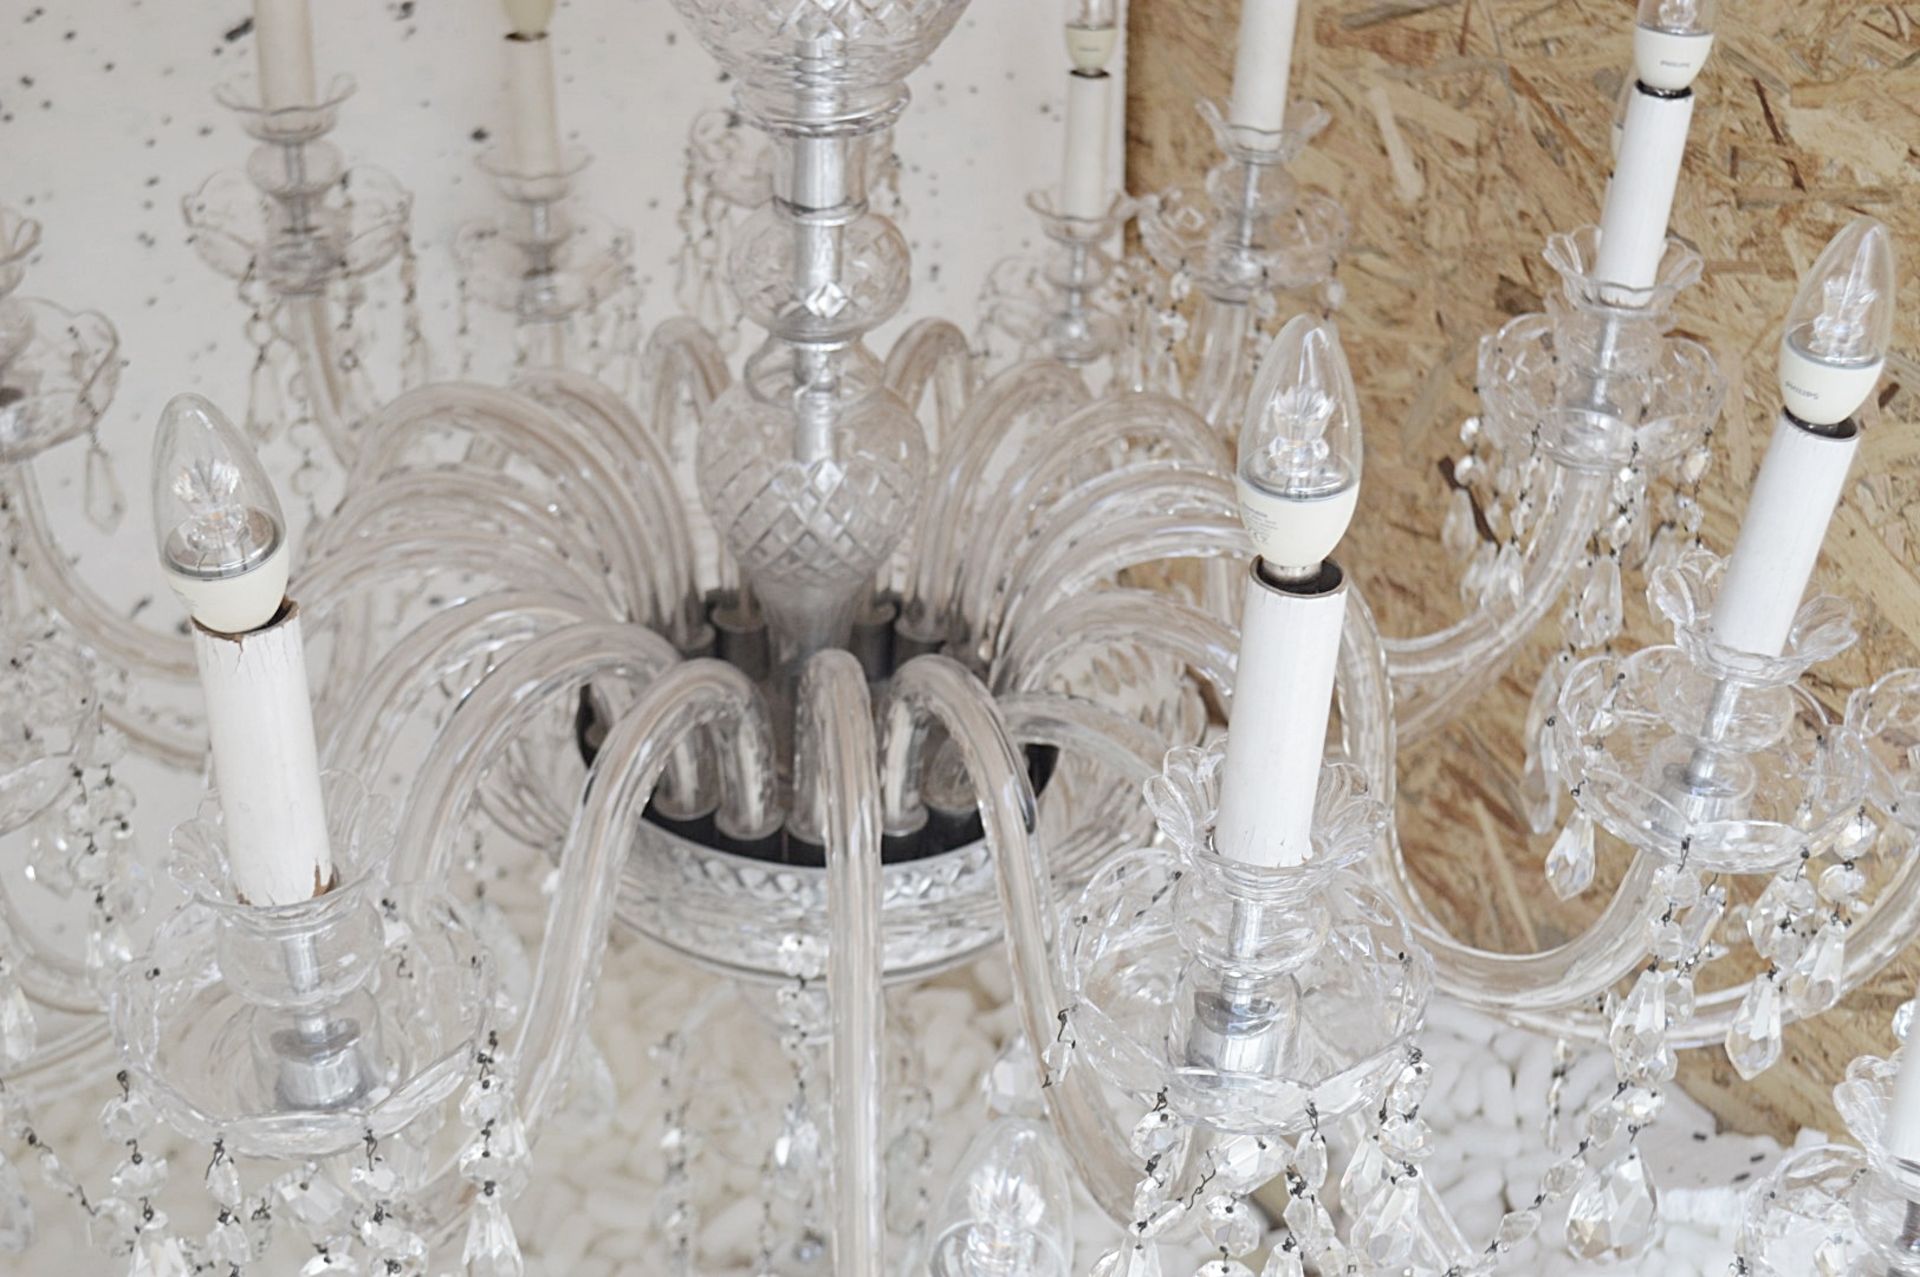 1 x Huge Commercial Ornate Georgian-Style Glass Chandelier - Dimensions: Height 150 x Diameter 125cm - Image 5 of 8